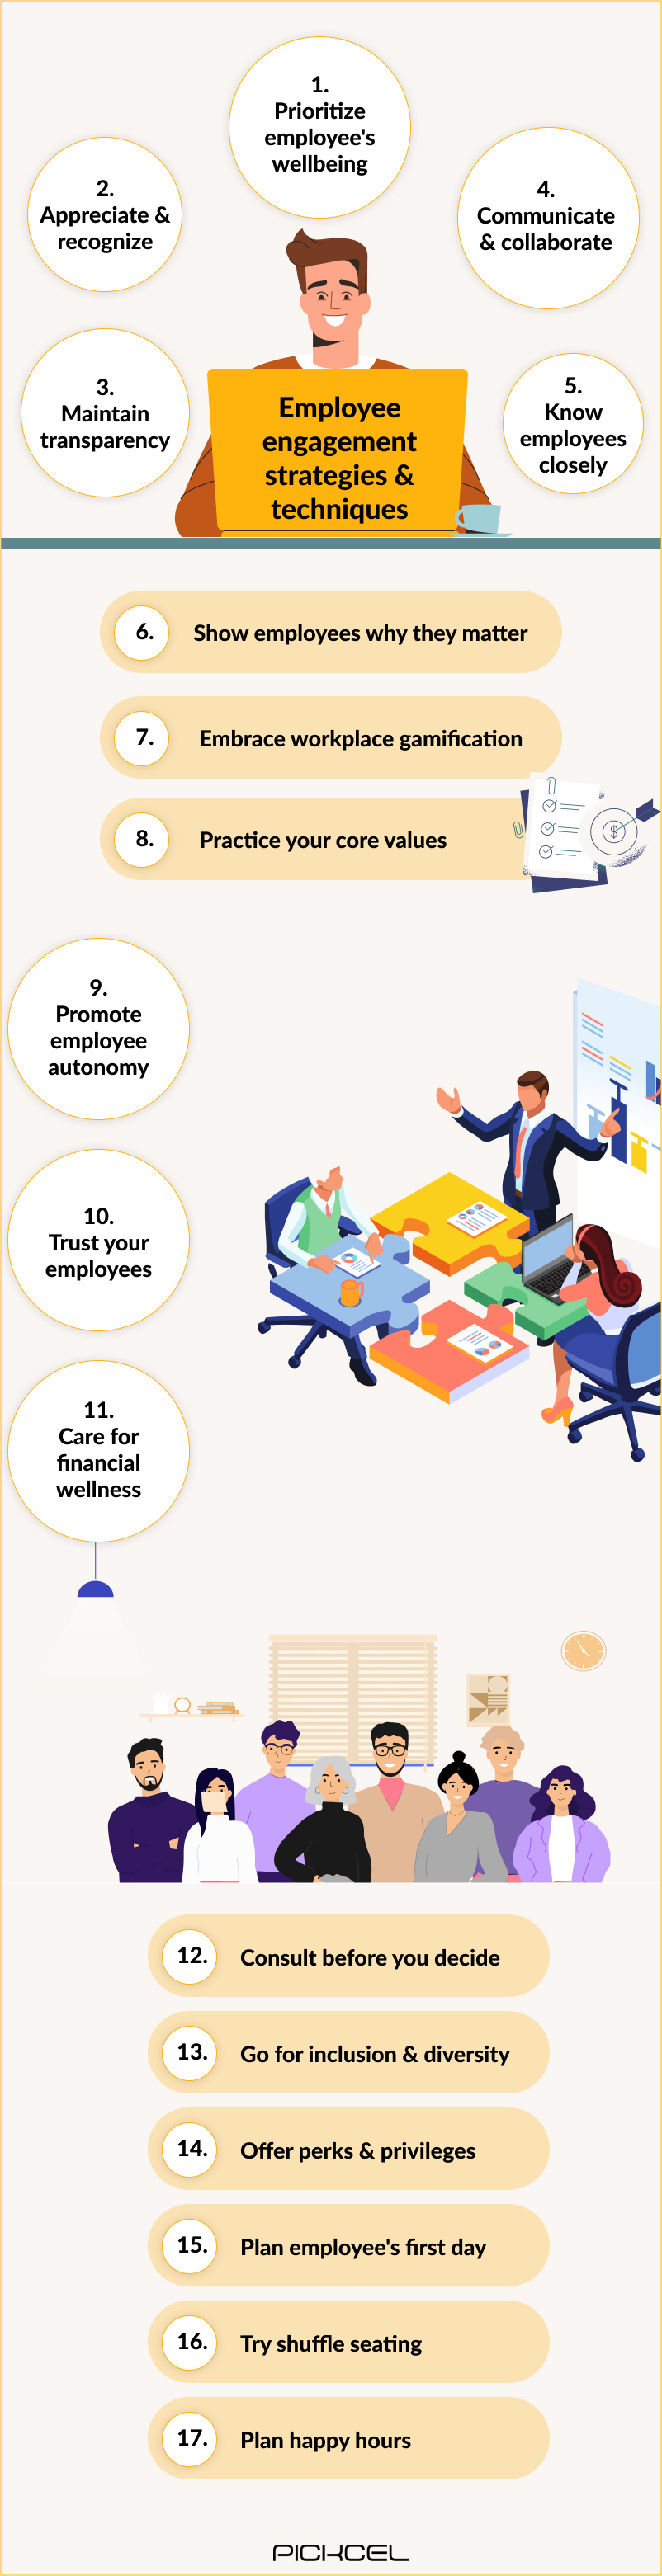 Infographic on employee engagement demonstrates strategies for successful team building